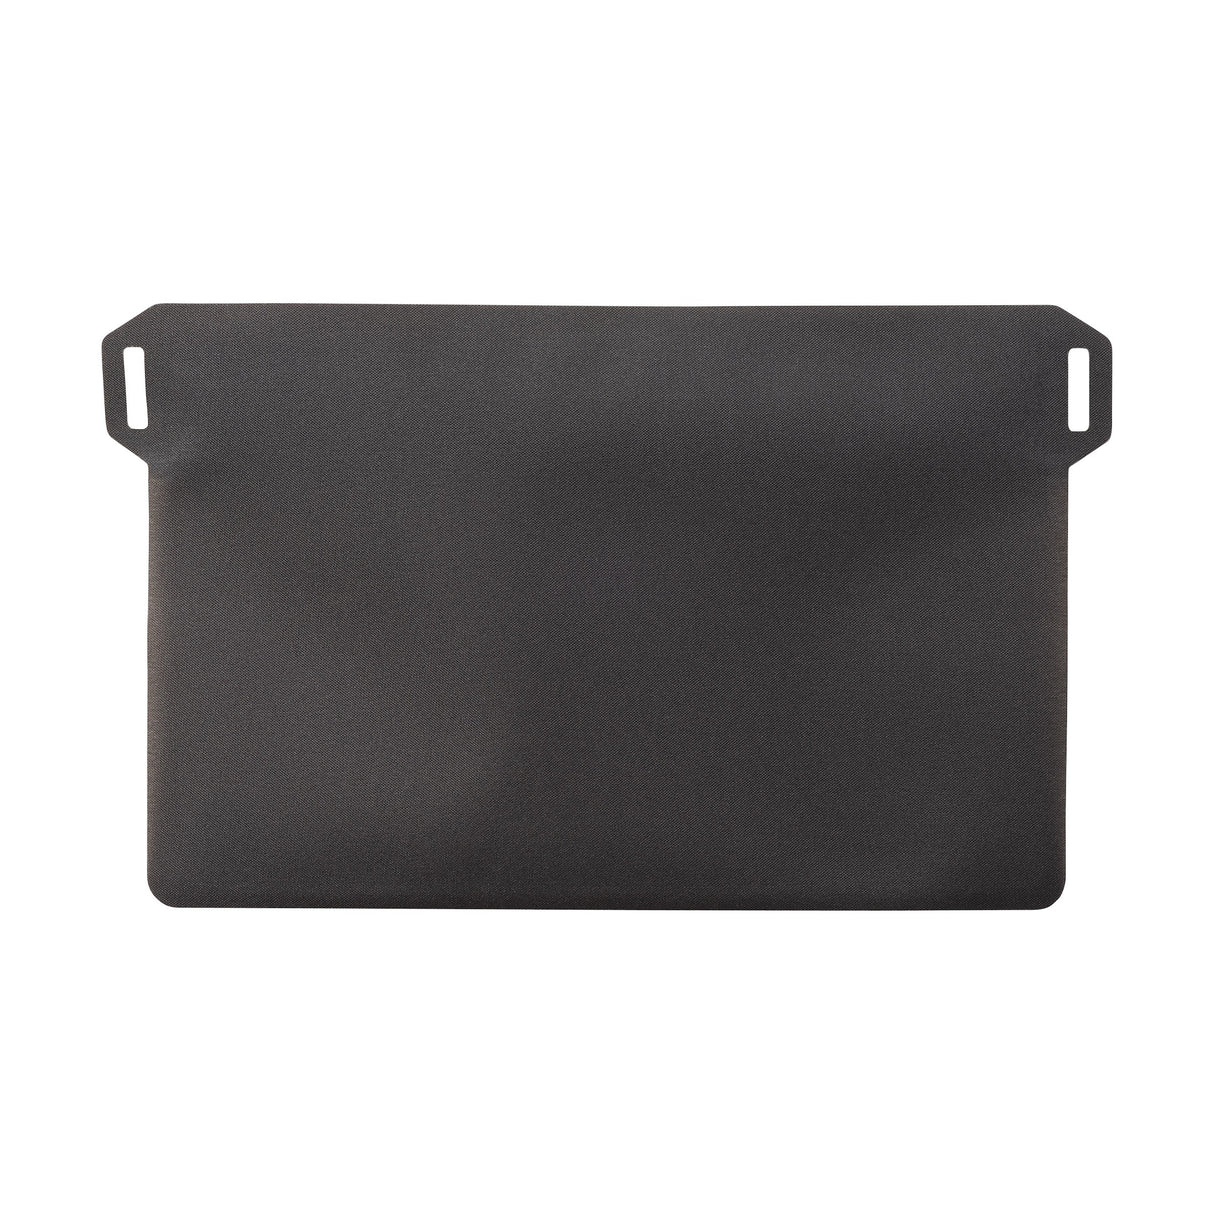 RunOff® Waterproof Small Travel Pouch